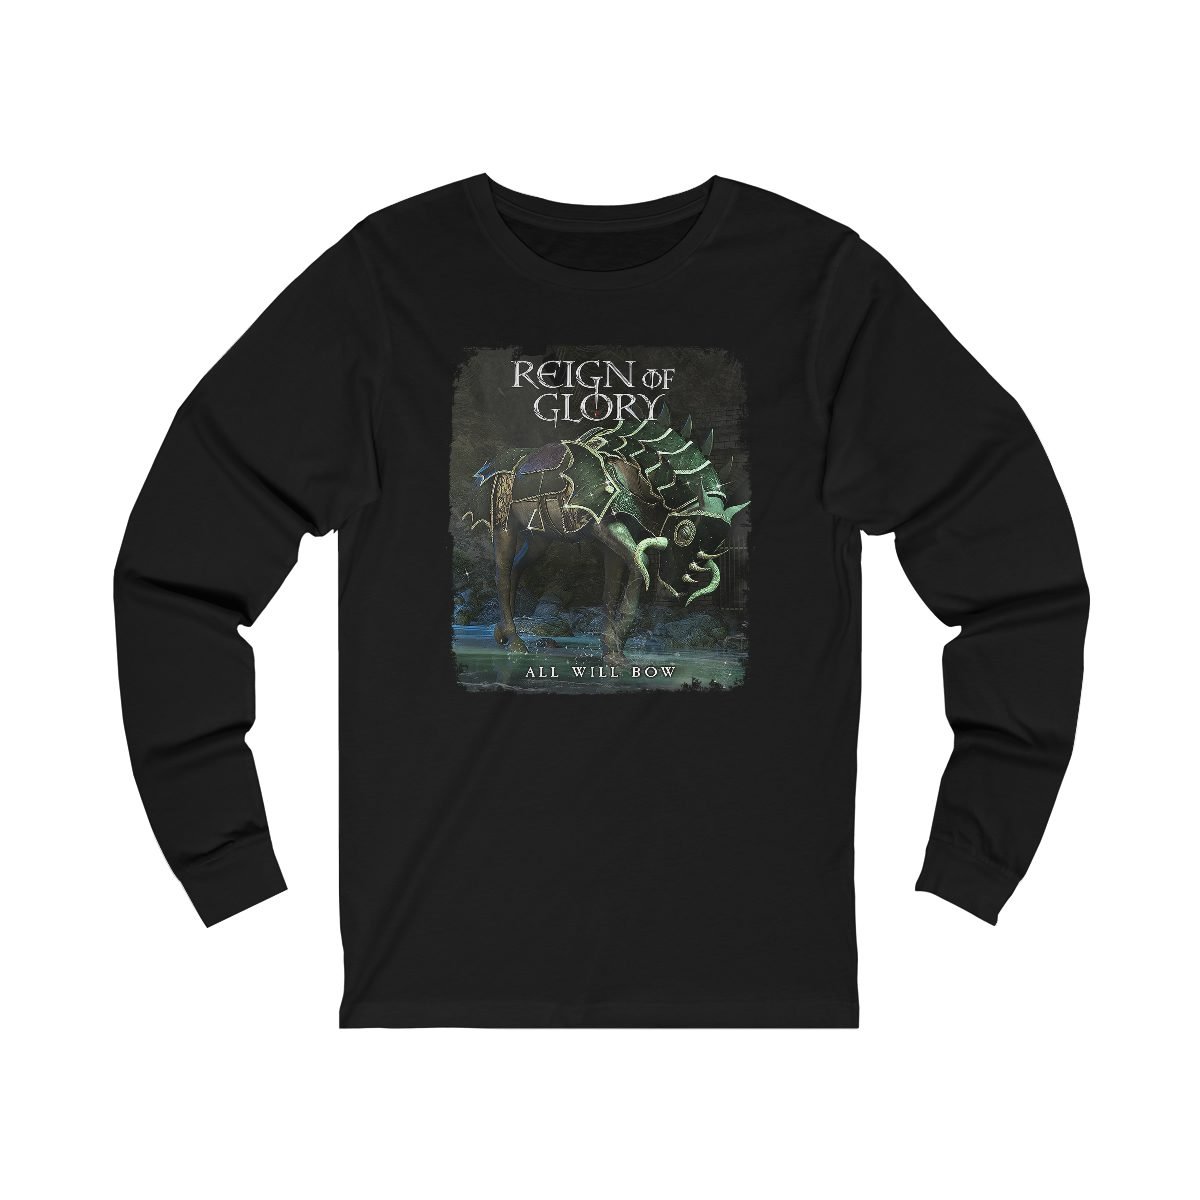 Reign of Glory – All Will Bow Long Sleeve Tshirt